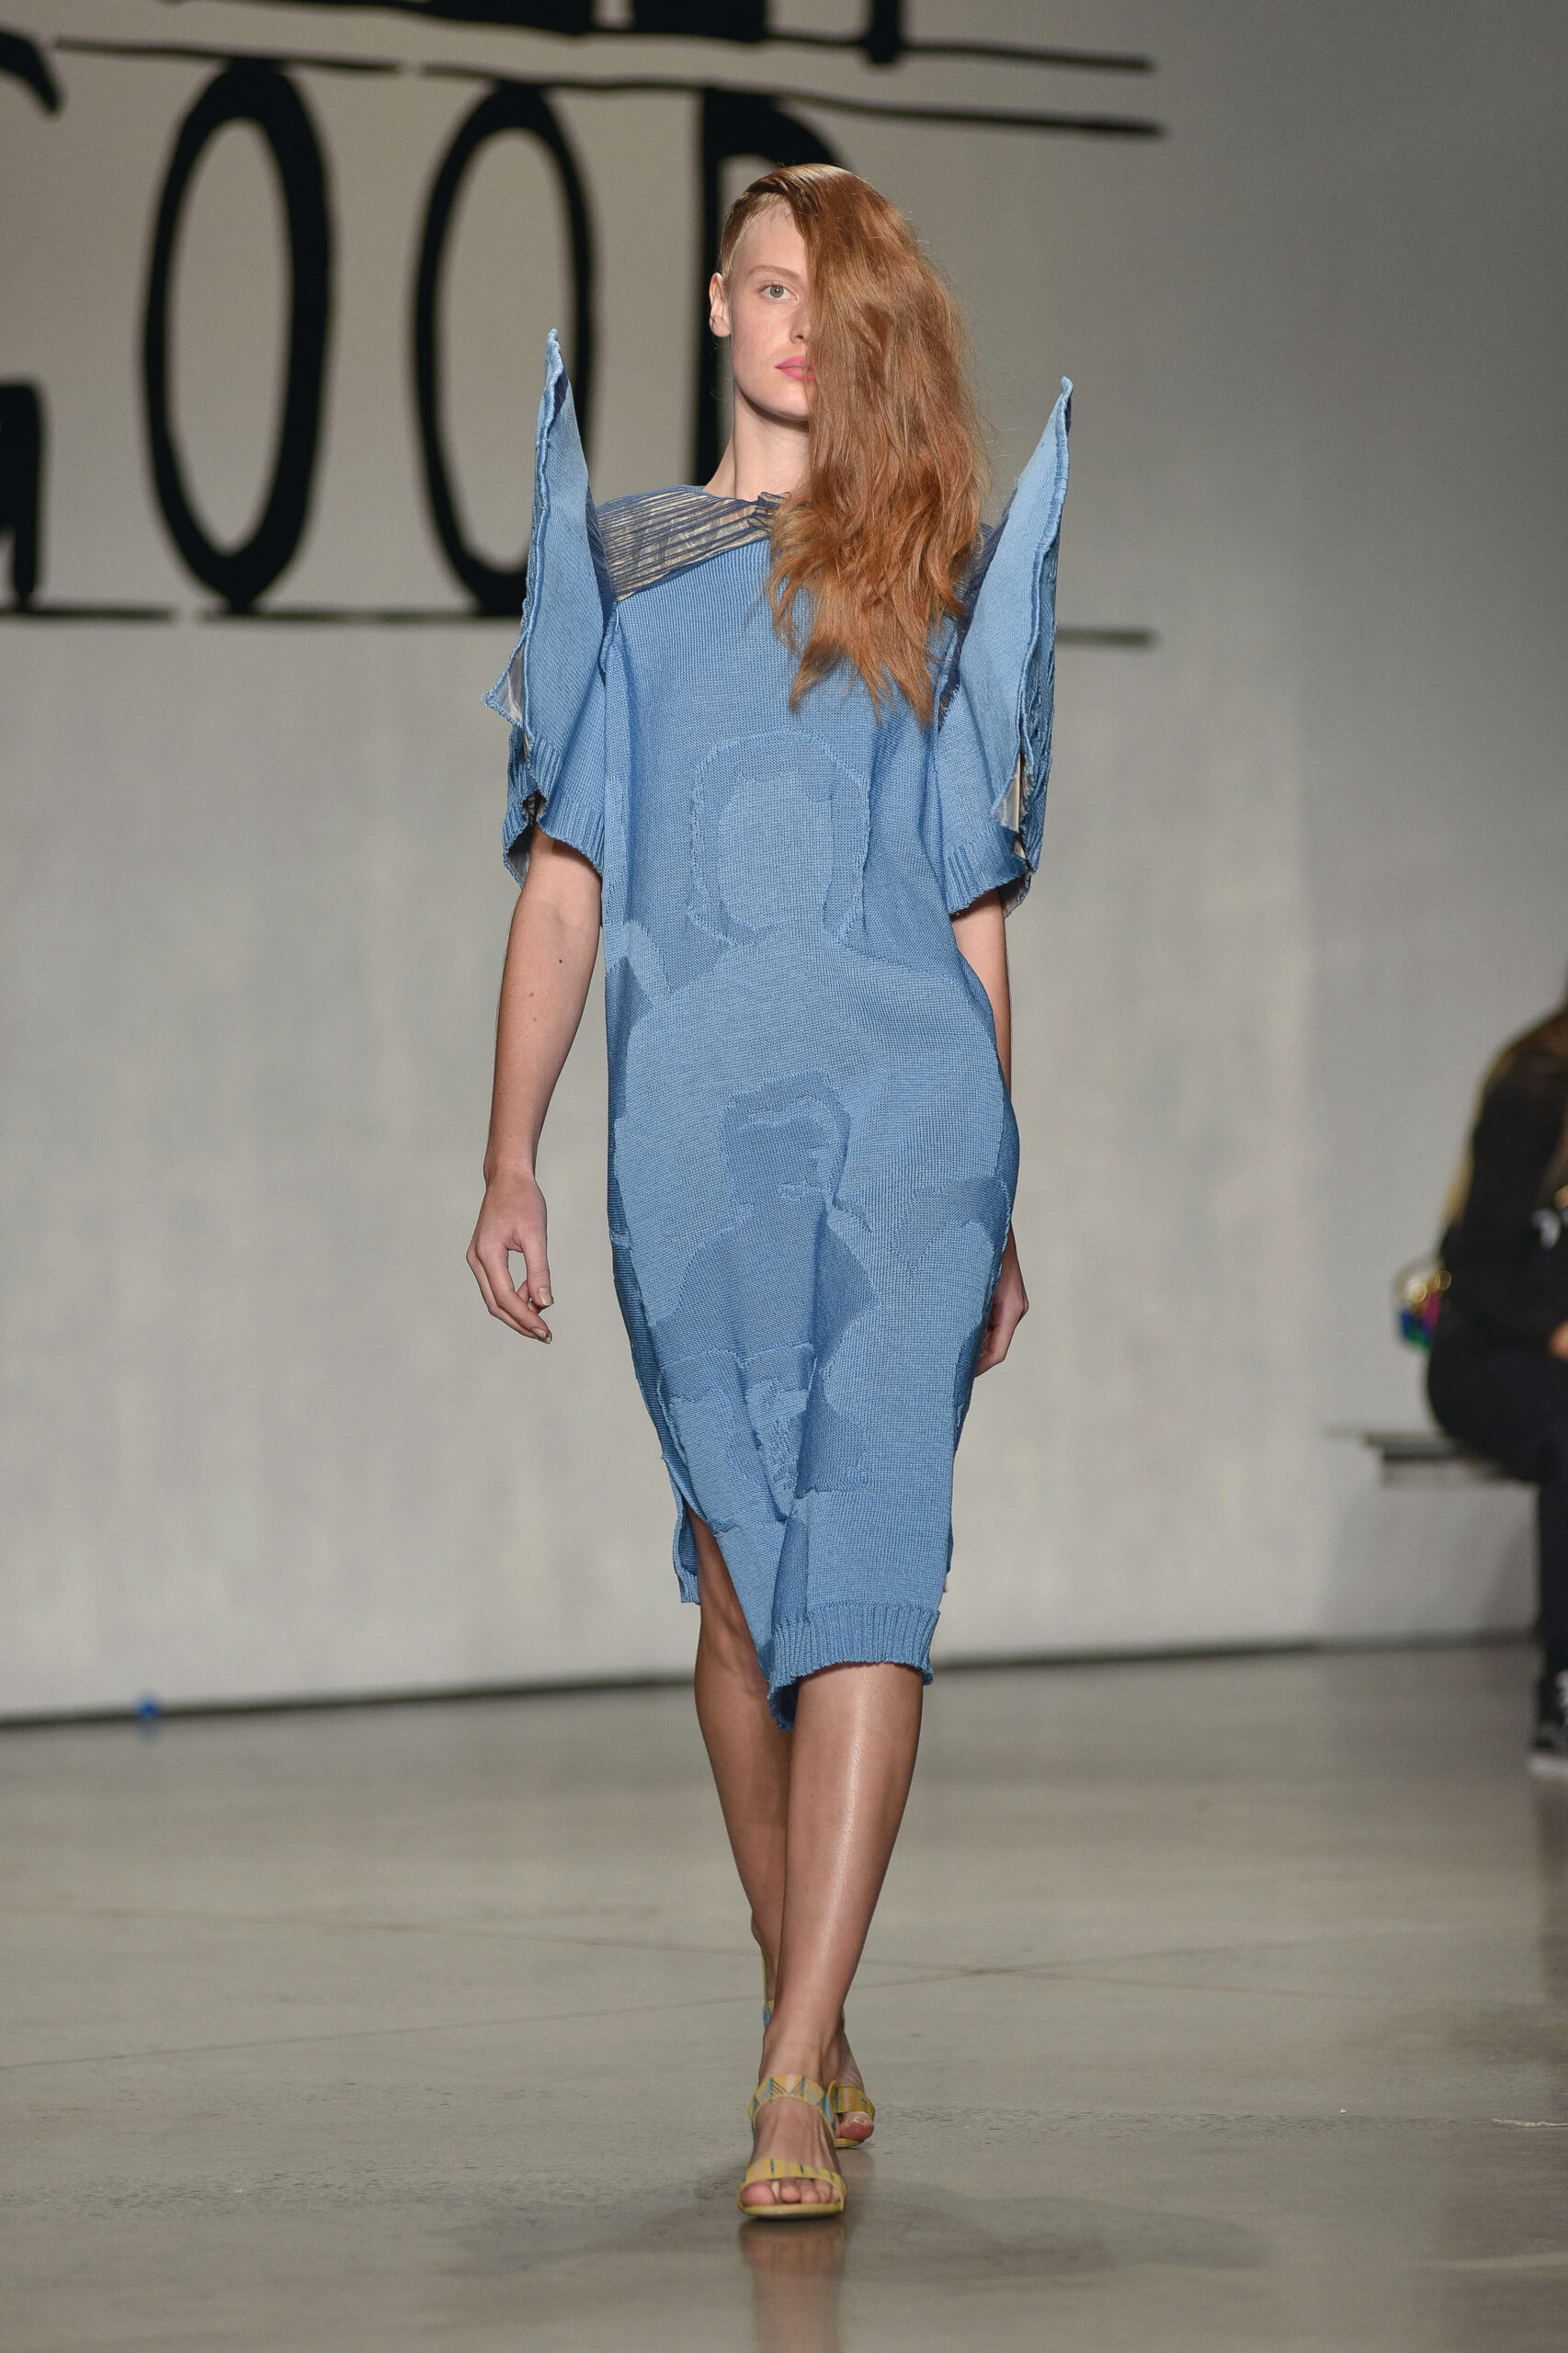 A model walks down a runway wearing a blue dress with should pads that spike upwards.